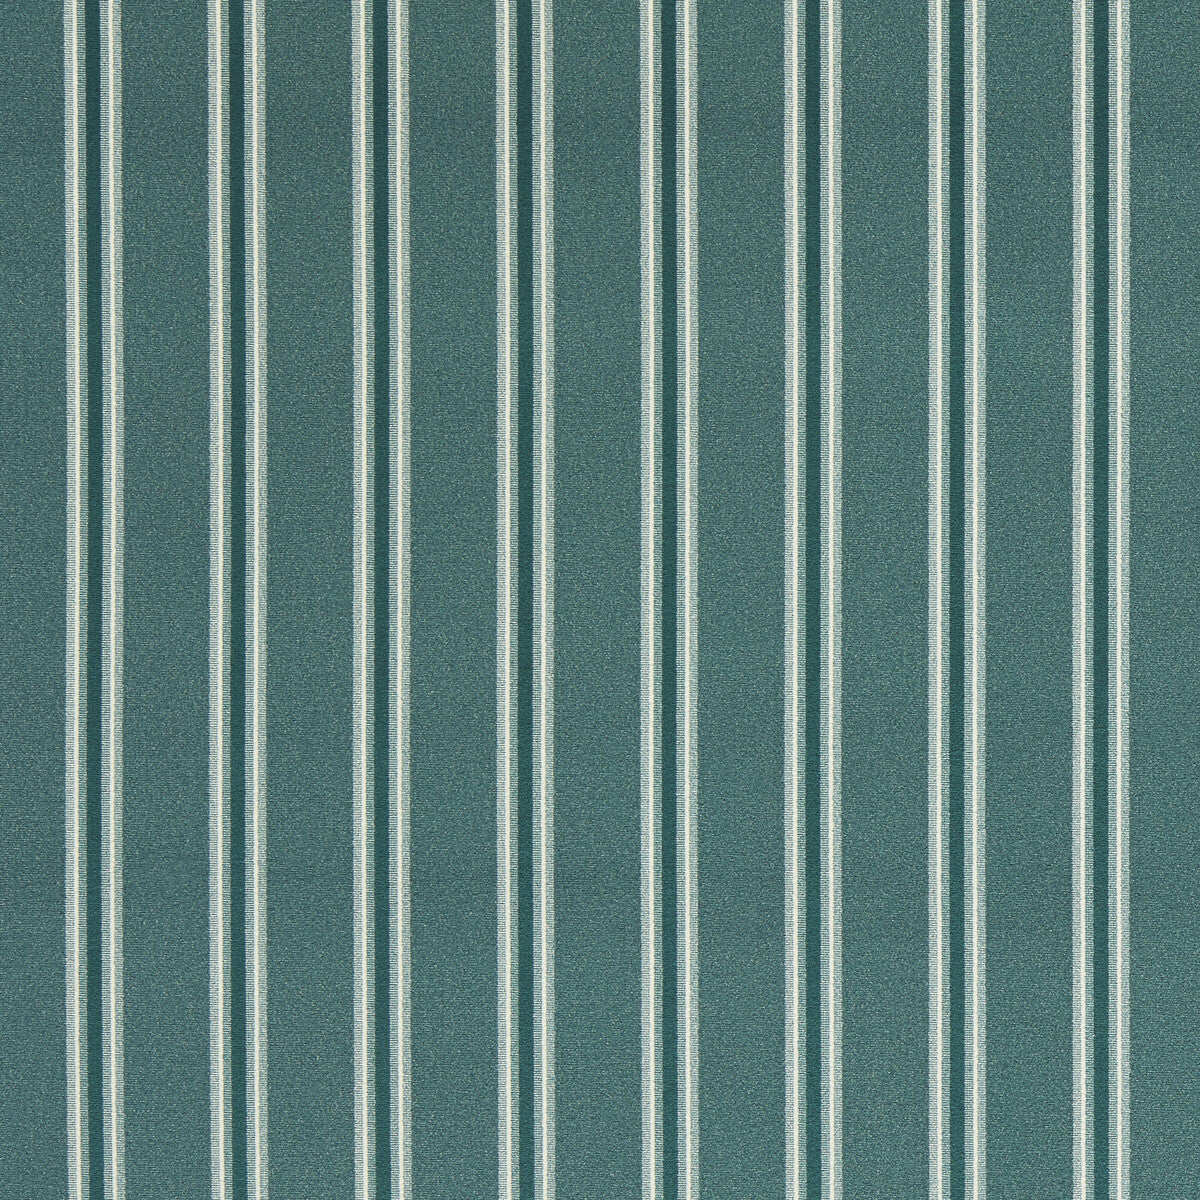 Bowfell fabric in teal color - pattern F1689/07.CAC.0 - by Clarke And Clarke in the Whitworth collection